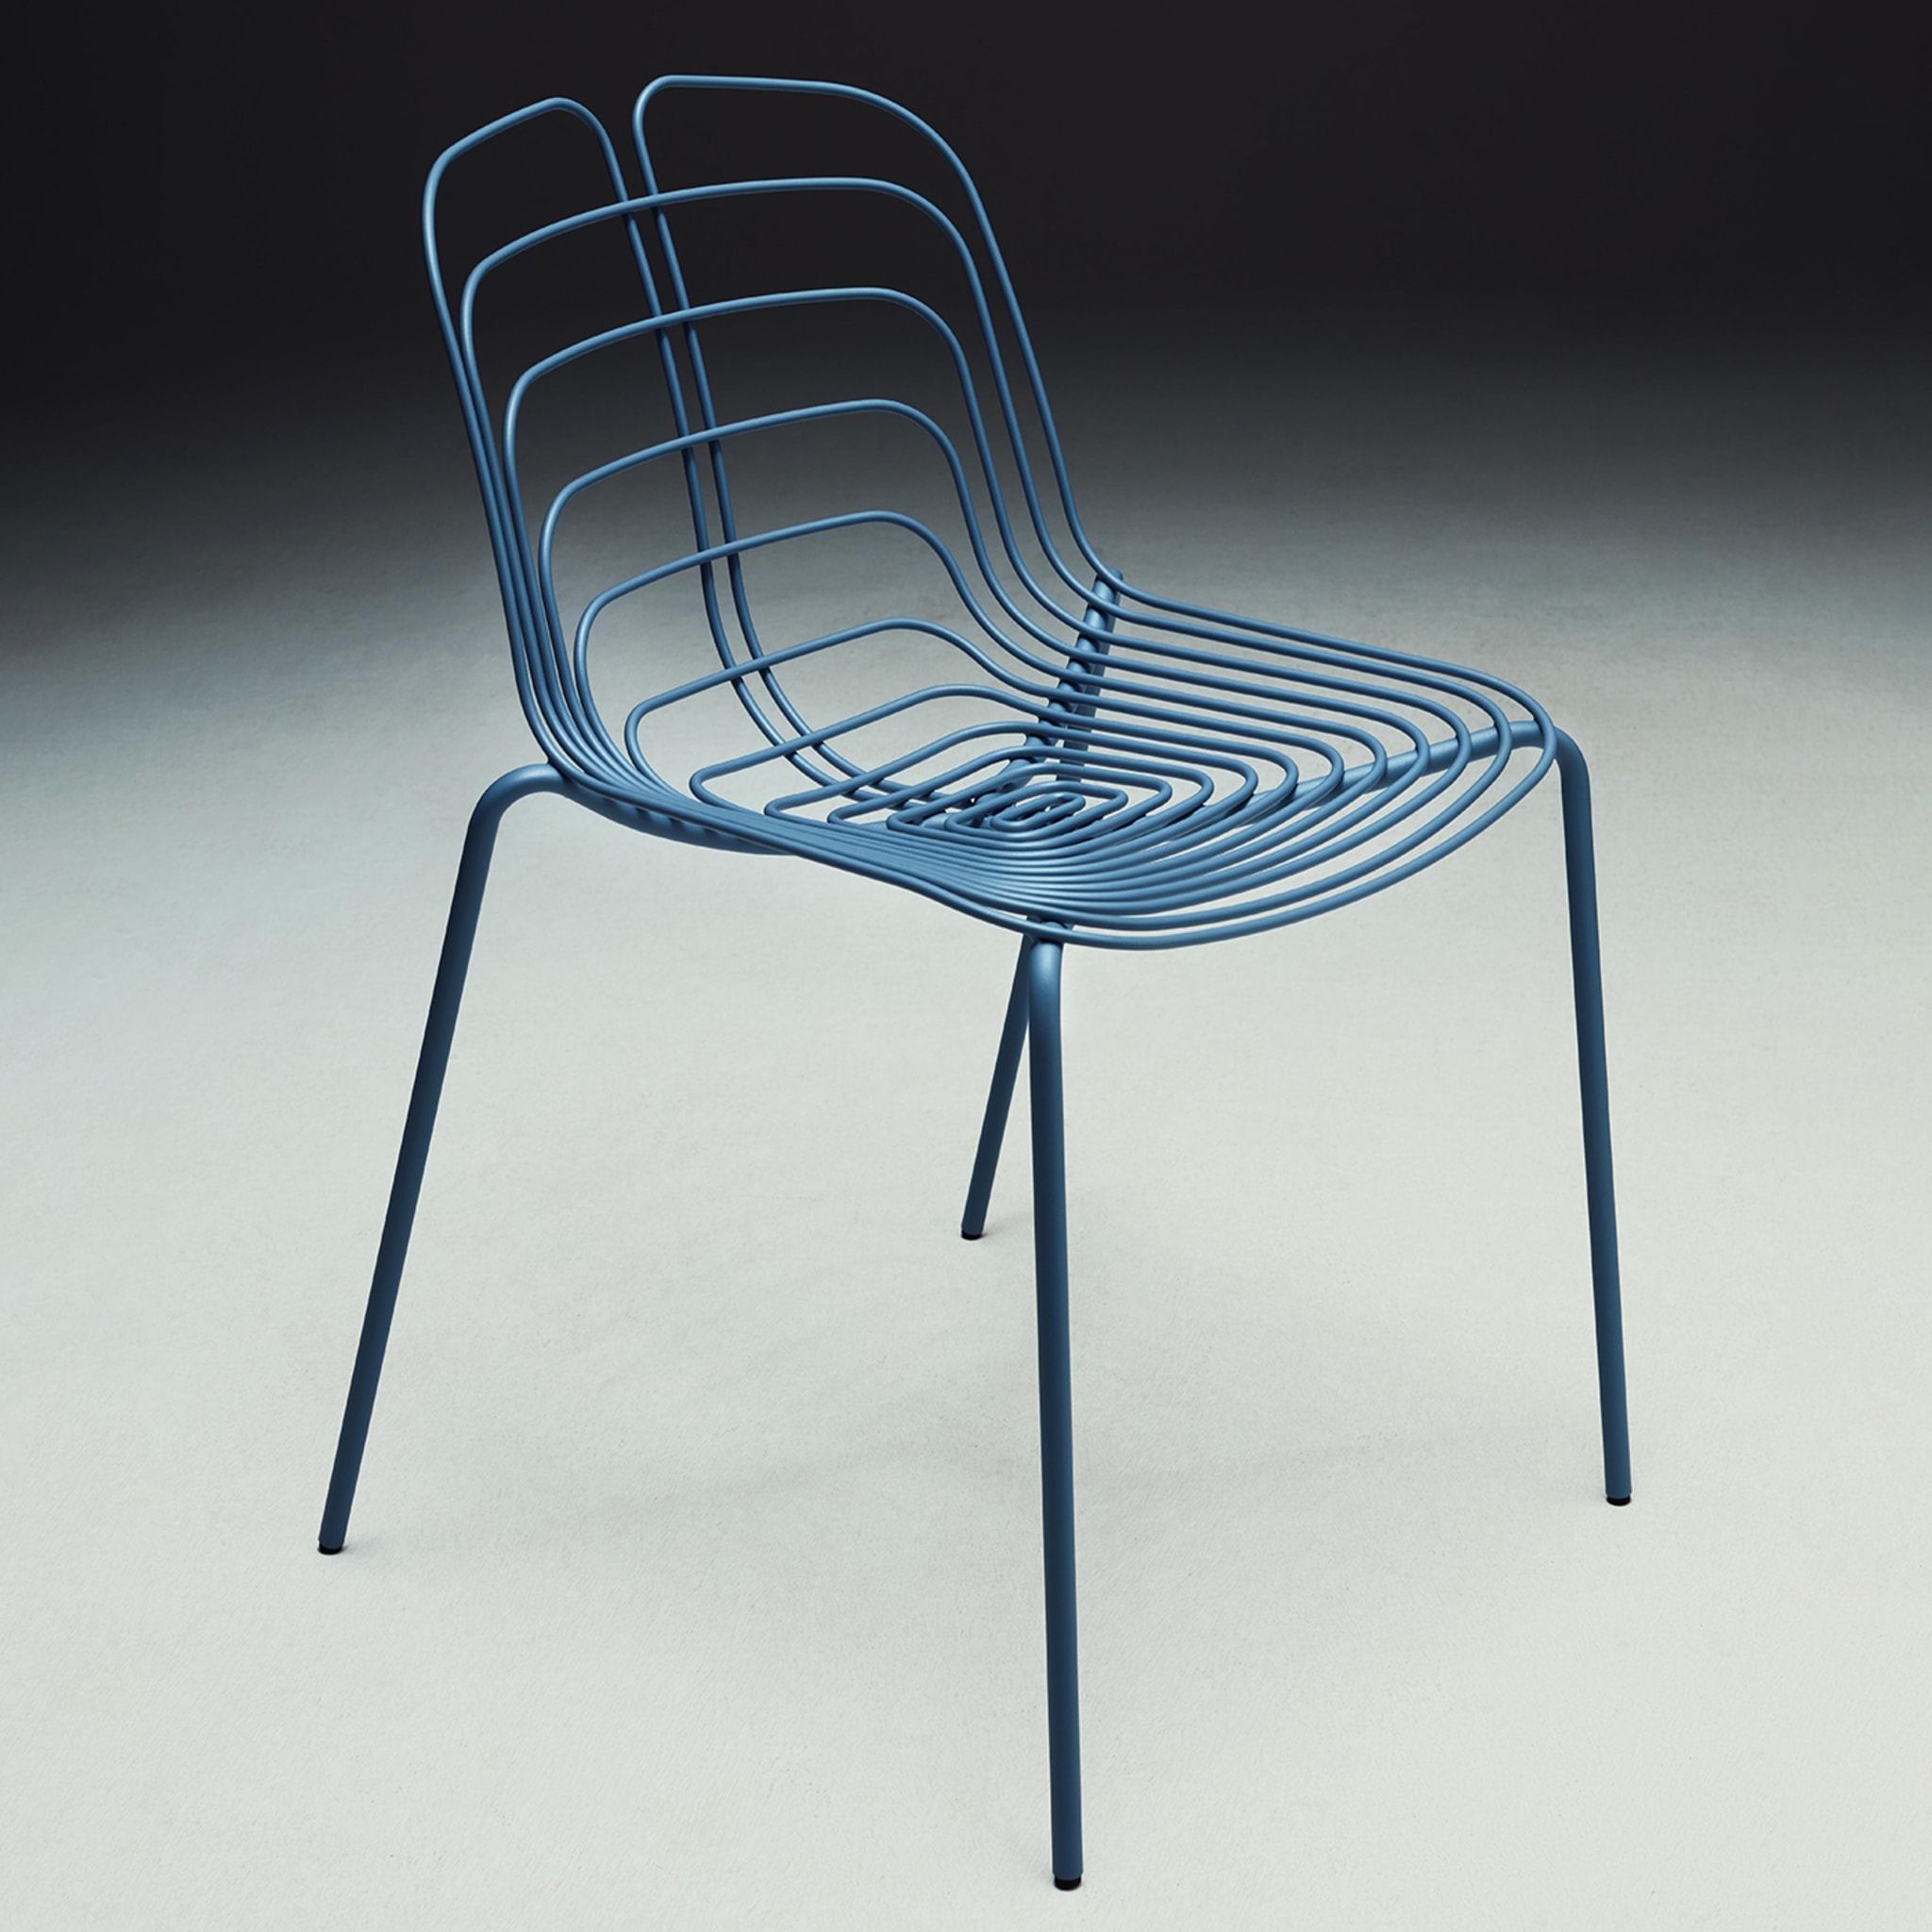 Wired Outdoor Chair by Micheal Young - Alternative view 2